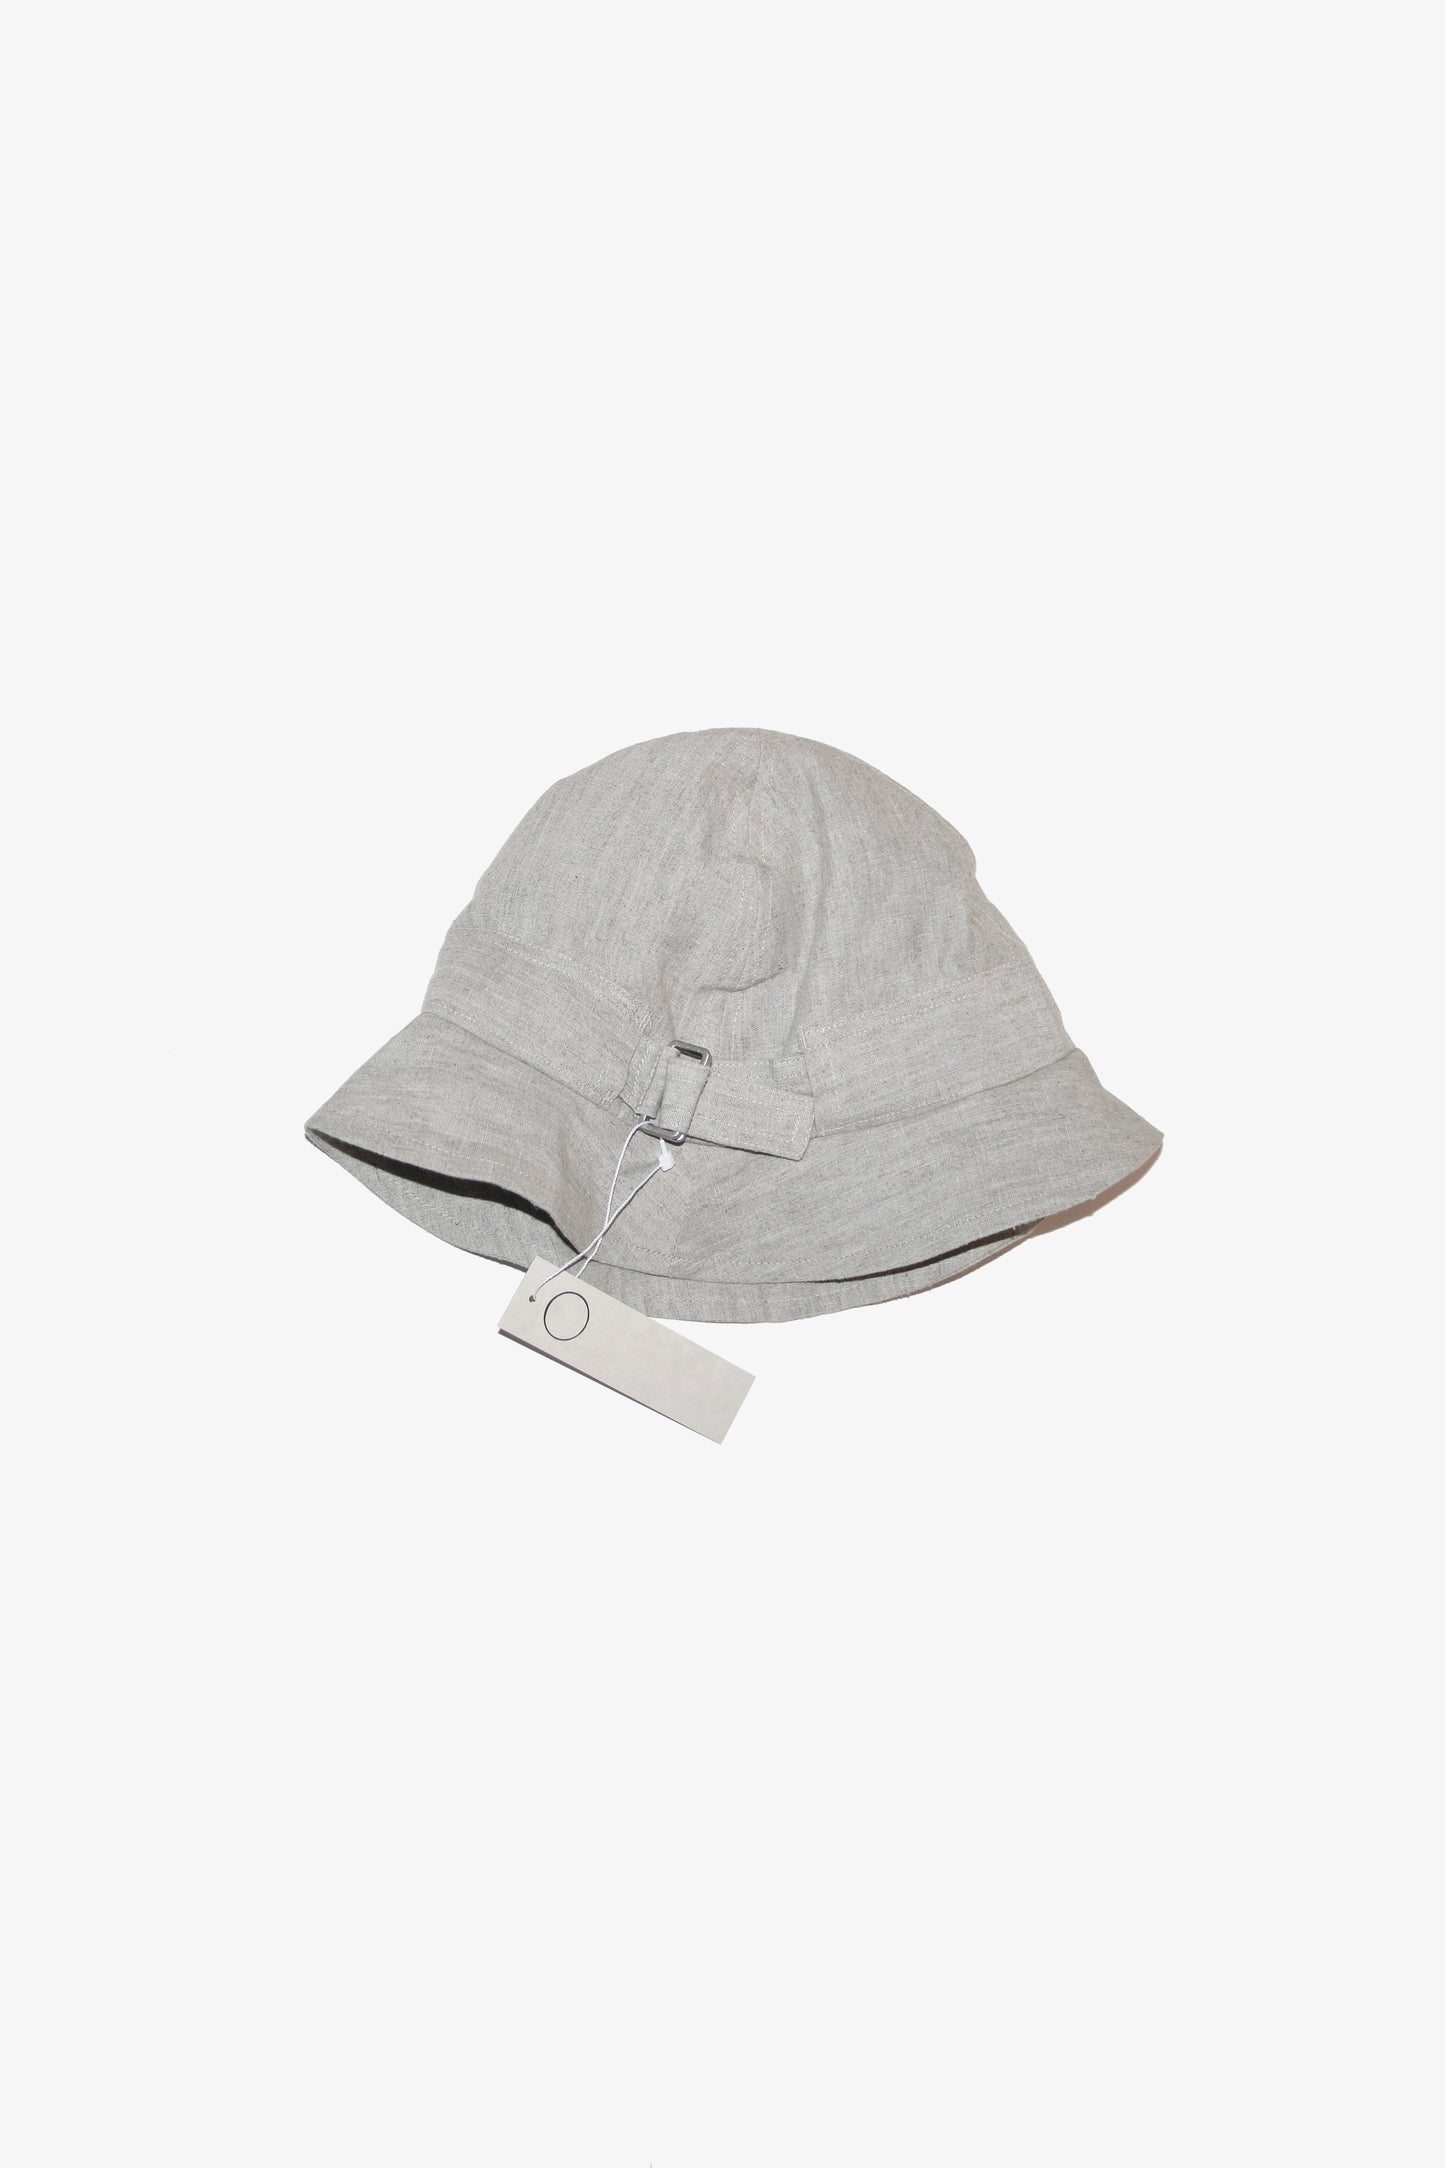 O PROJECT HEMP MELE CLOTH FISHER HAT - NATURAL / RED BRICK